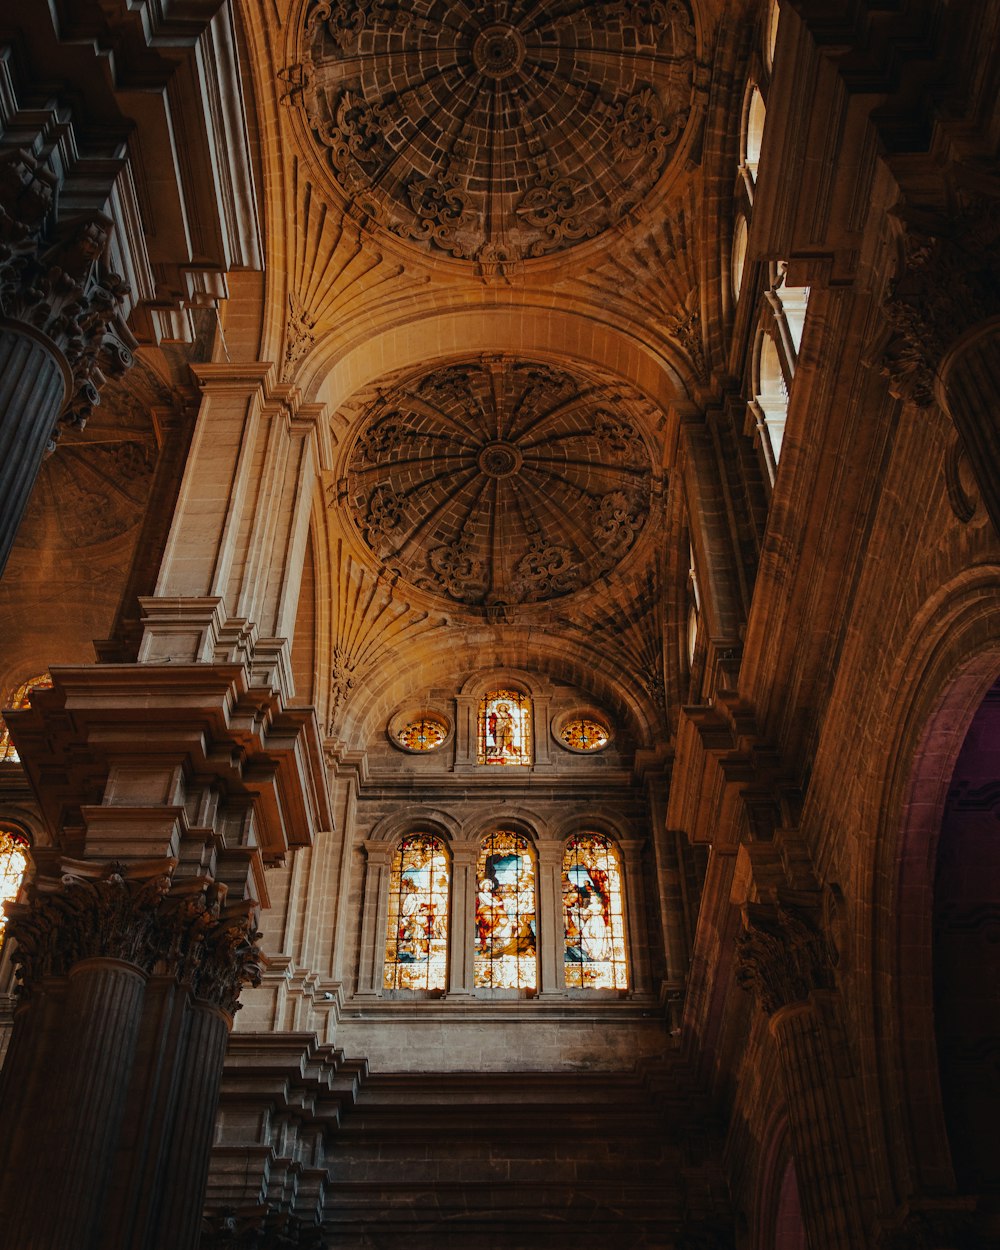 the ceiling of a large cathedral with stained glass windows